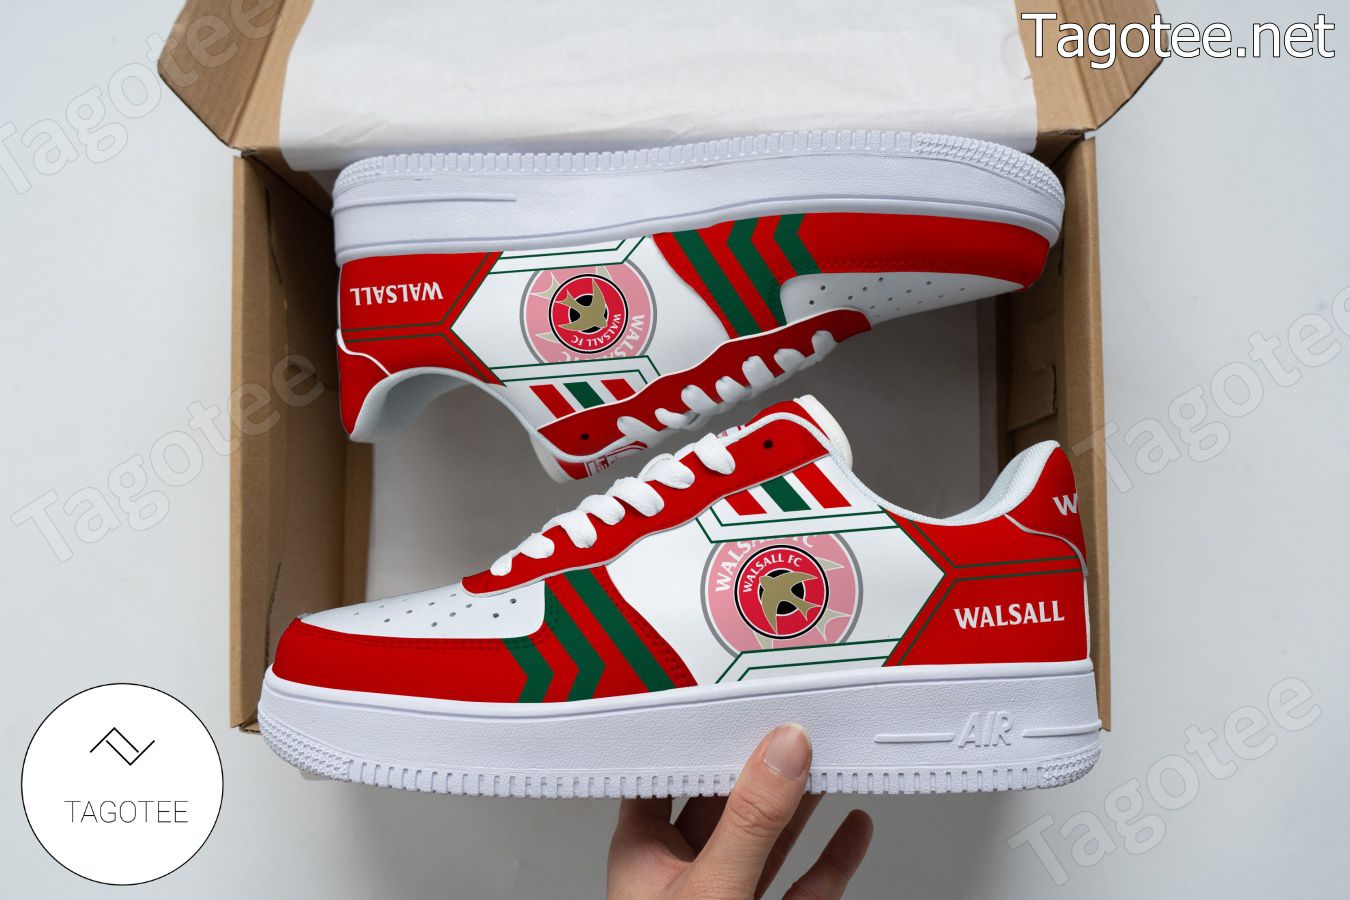 Best Gucci Tiger White Sneakers Air Jordan 13 Shoes - Tagotee